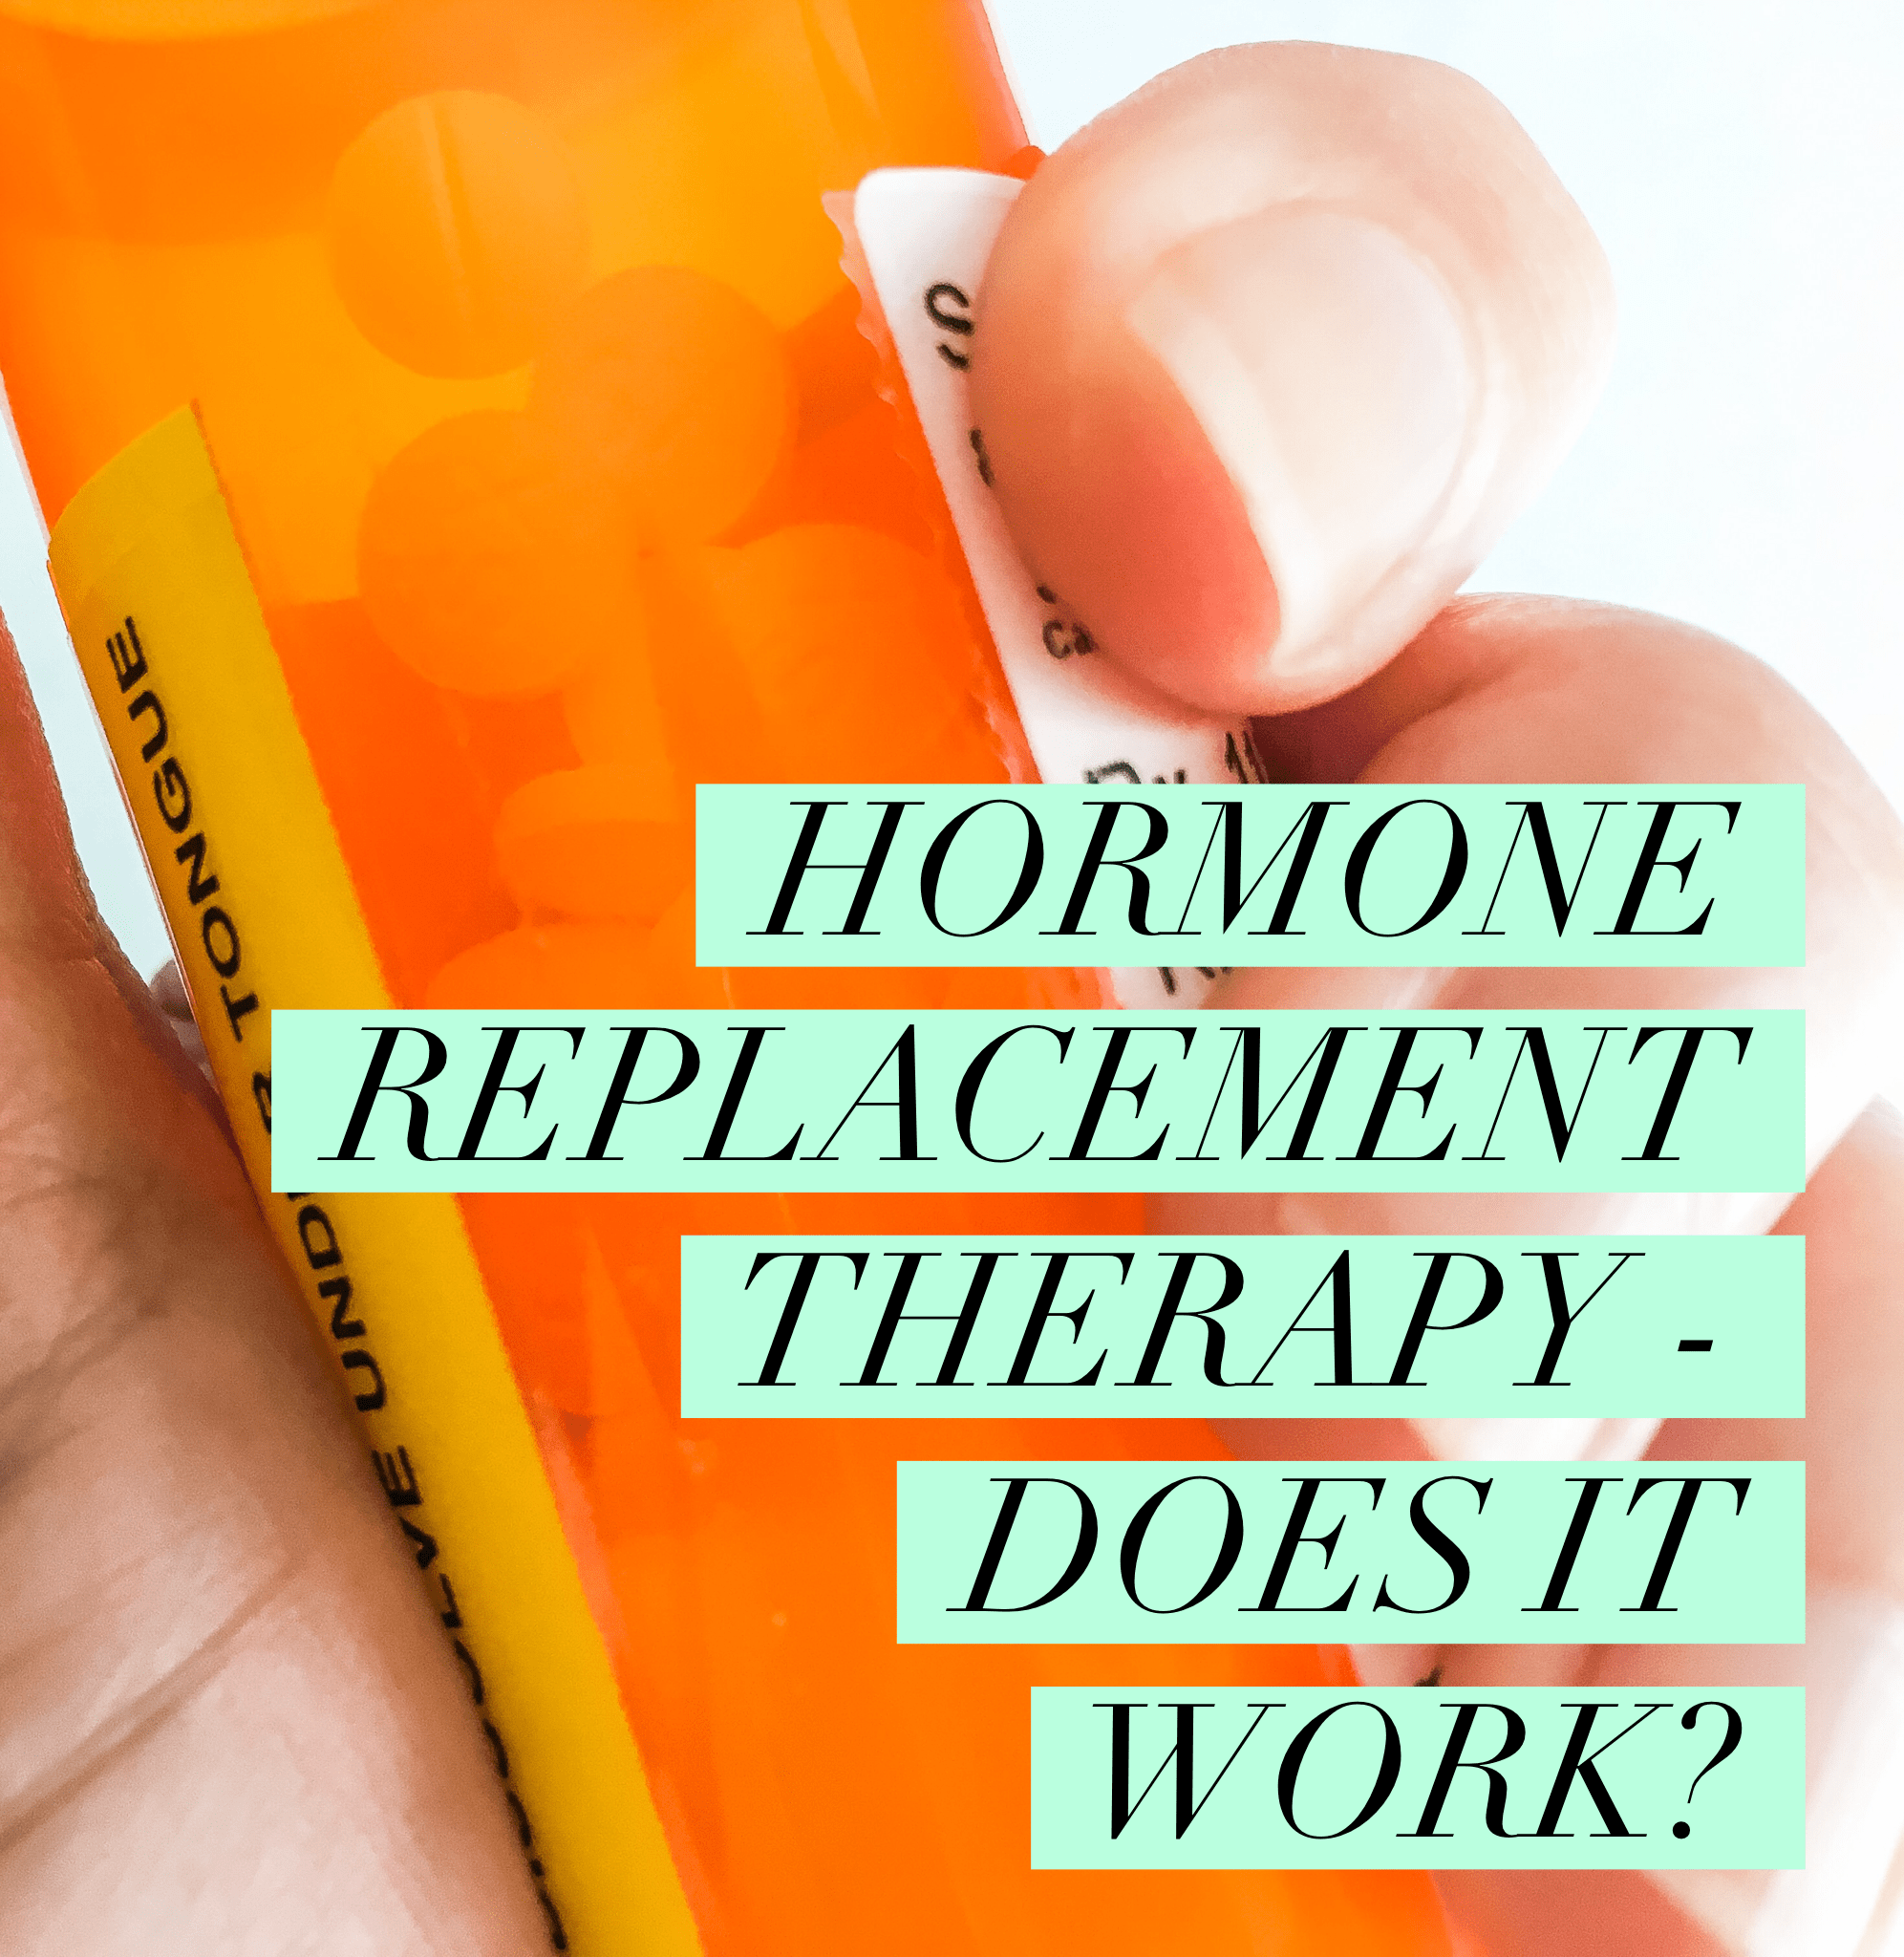 Hormone Replacement Therapy HRT Progesterone Pills What It's Like Hormonal Hell